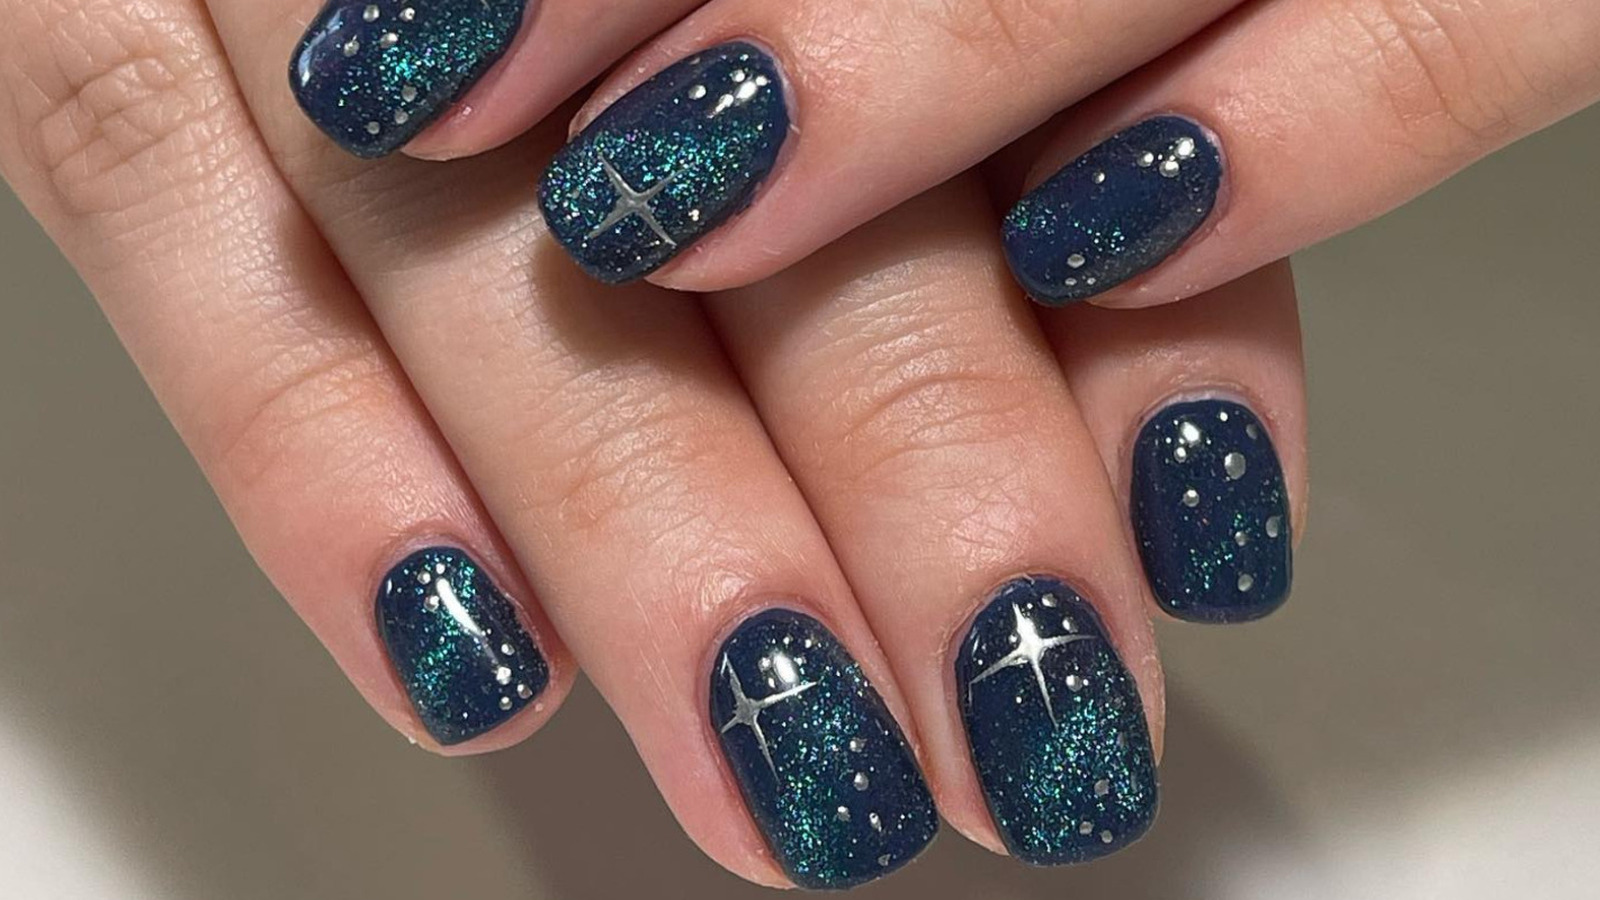 7. 40+ Mesmerizing Galaxy Nail Art Designs for Your Next Manicure - wide 6